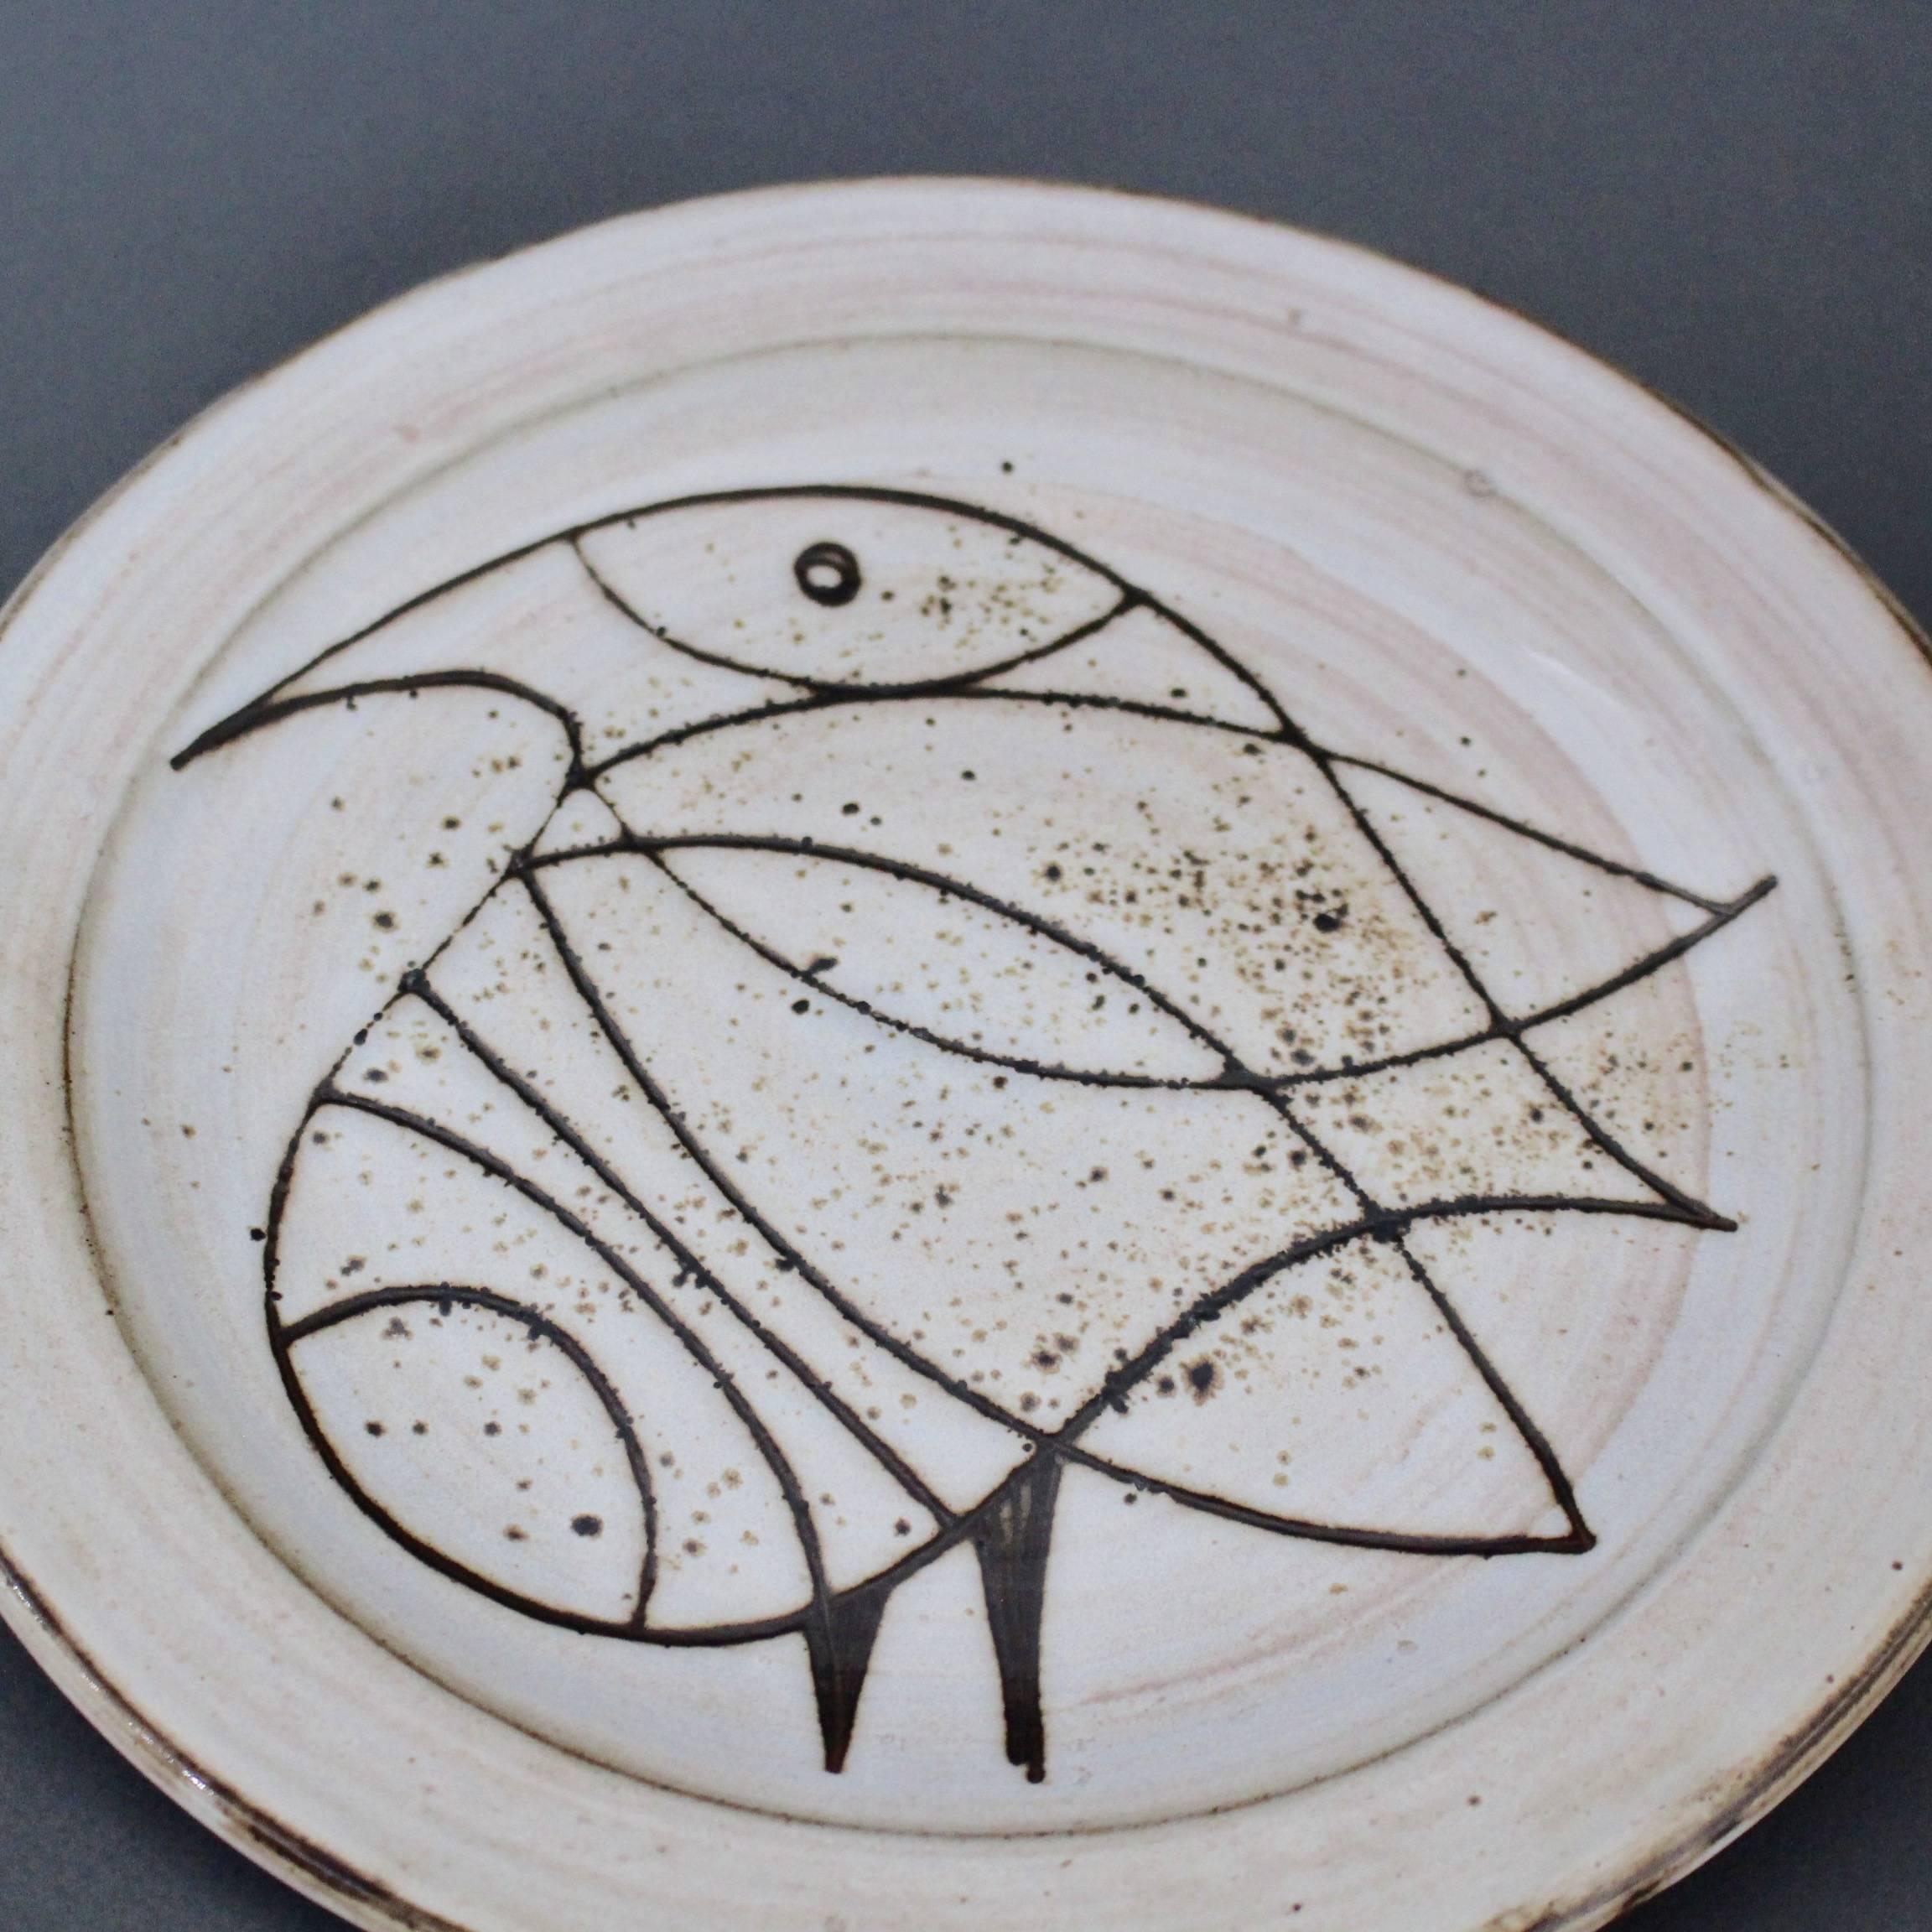 Glazed Mid-century Ceramic Plate with Stylised Bird by Jacques Pouchain, circa 1950s